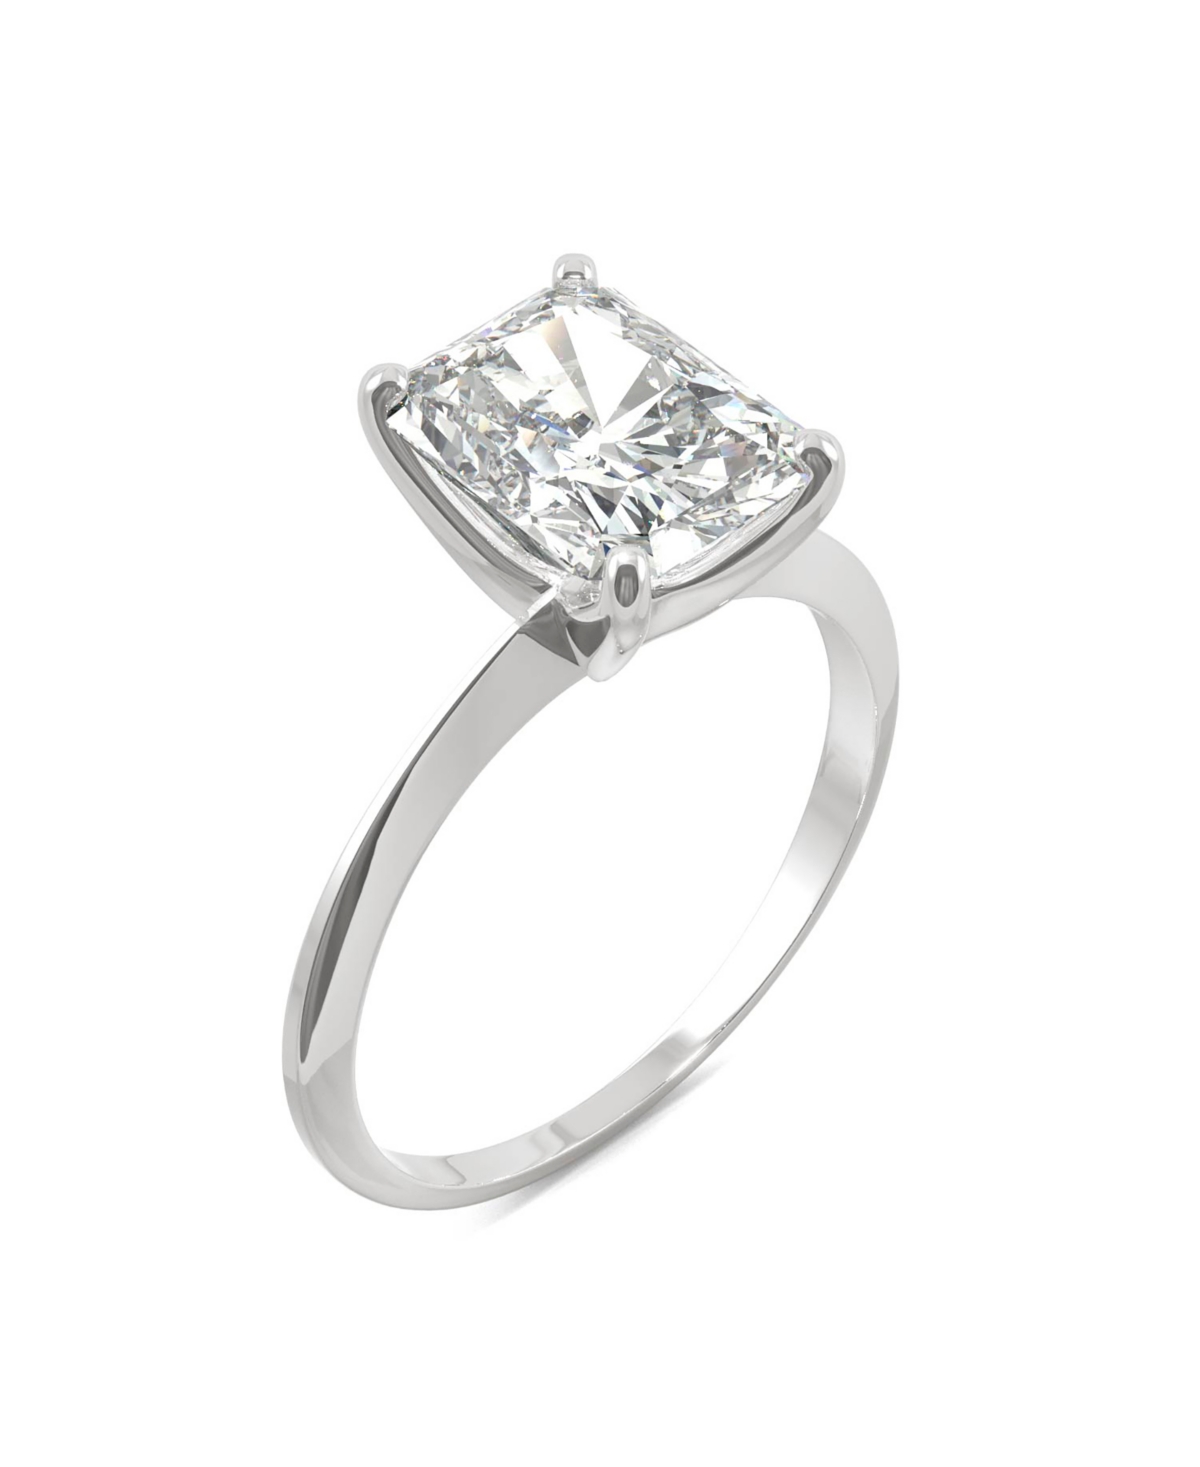 Moissanite Radiant Cut Solitaire Ring (2 3/4 ct. t.w. Diamond Equivalent) in 14k White Gold - White Gold